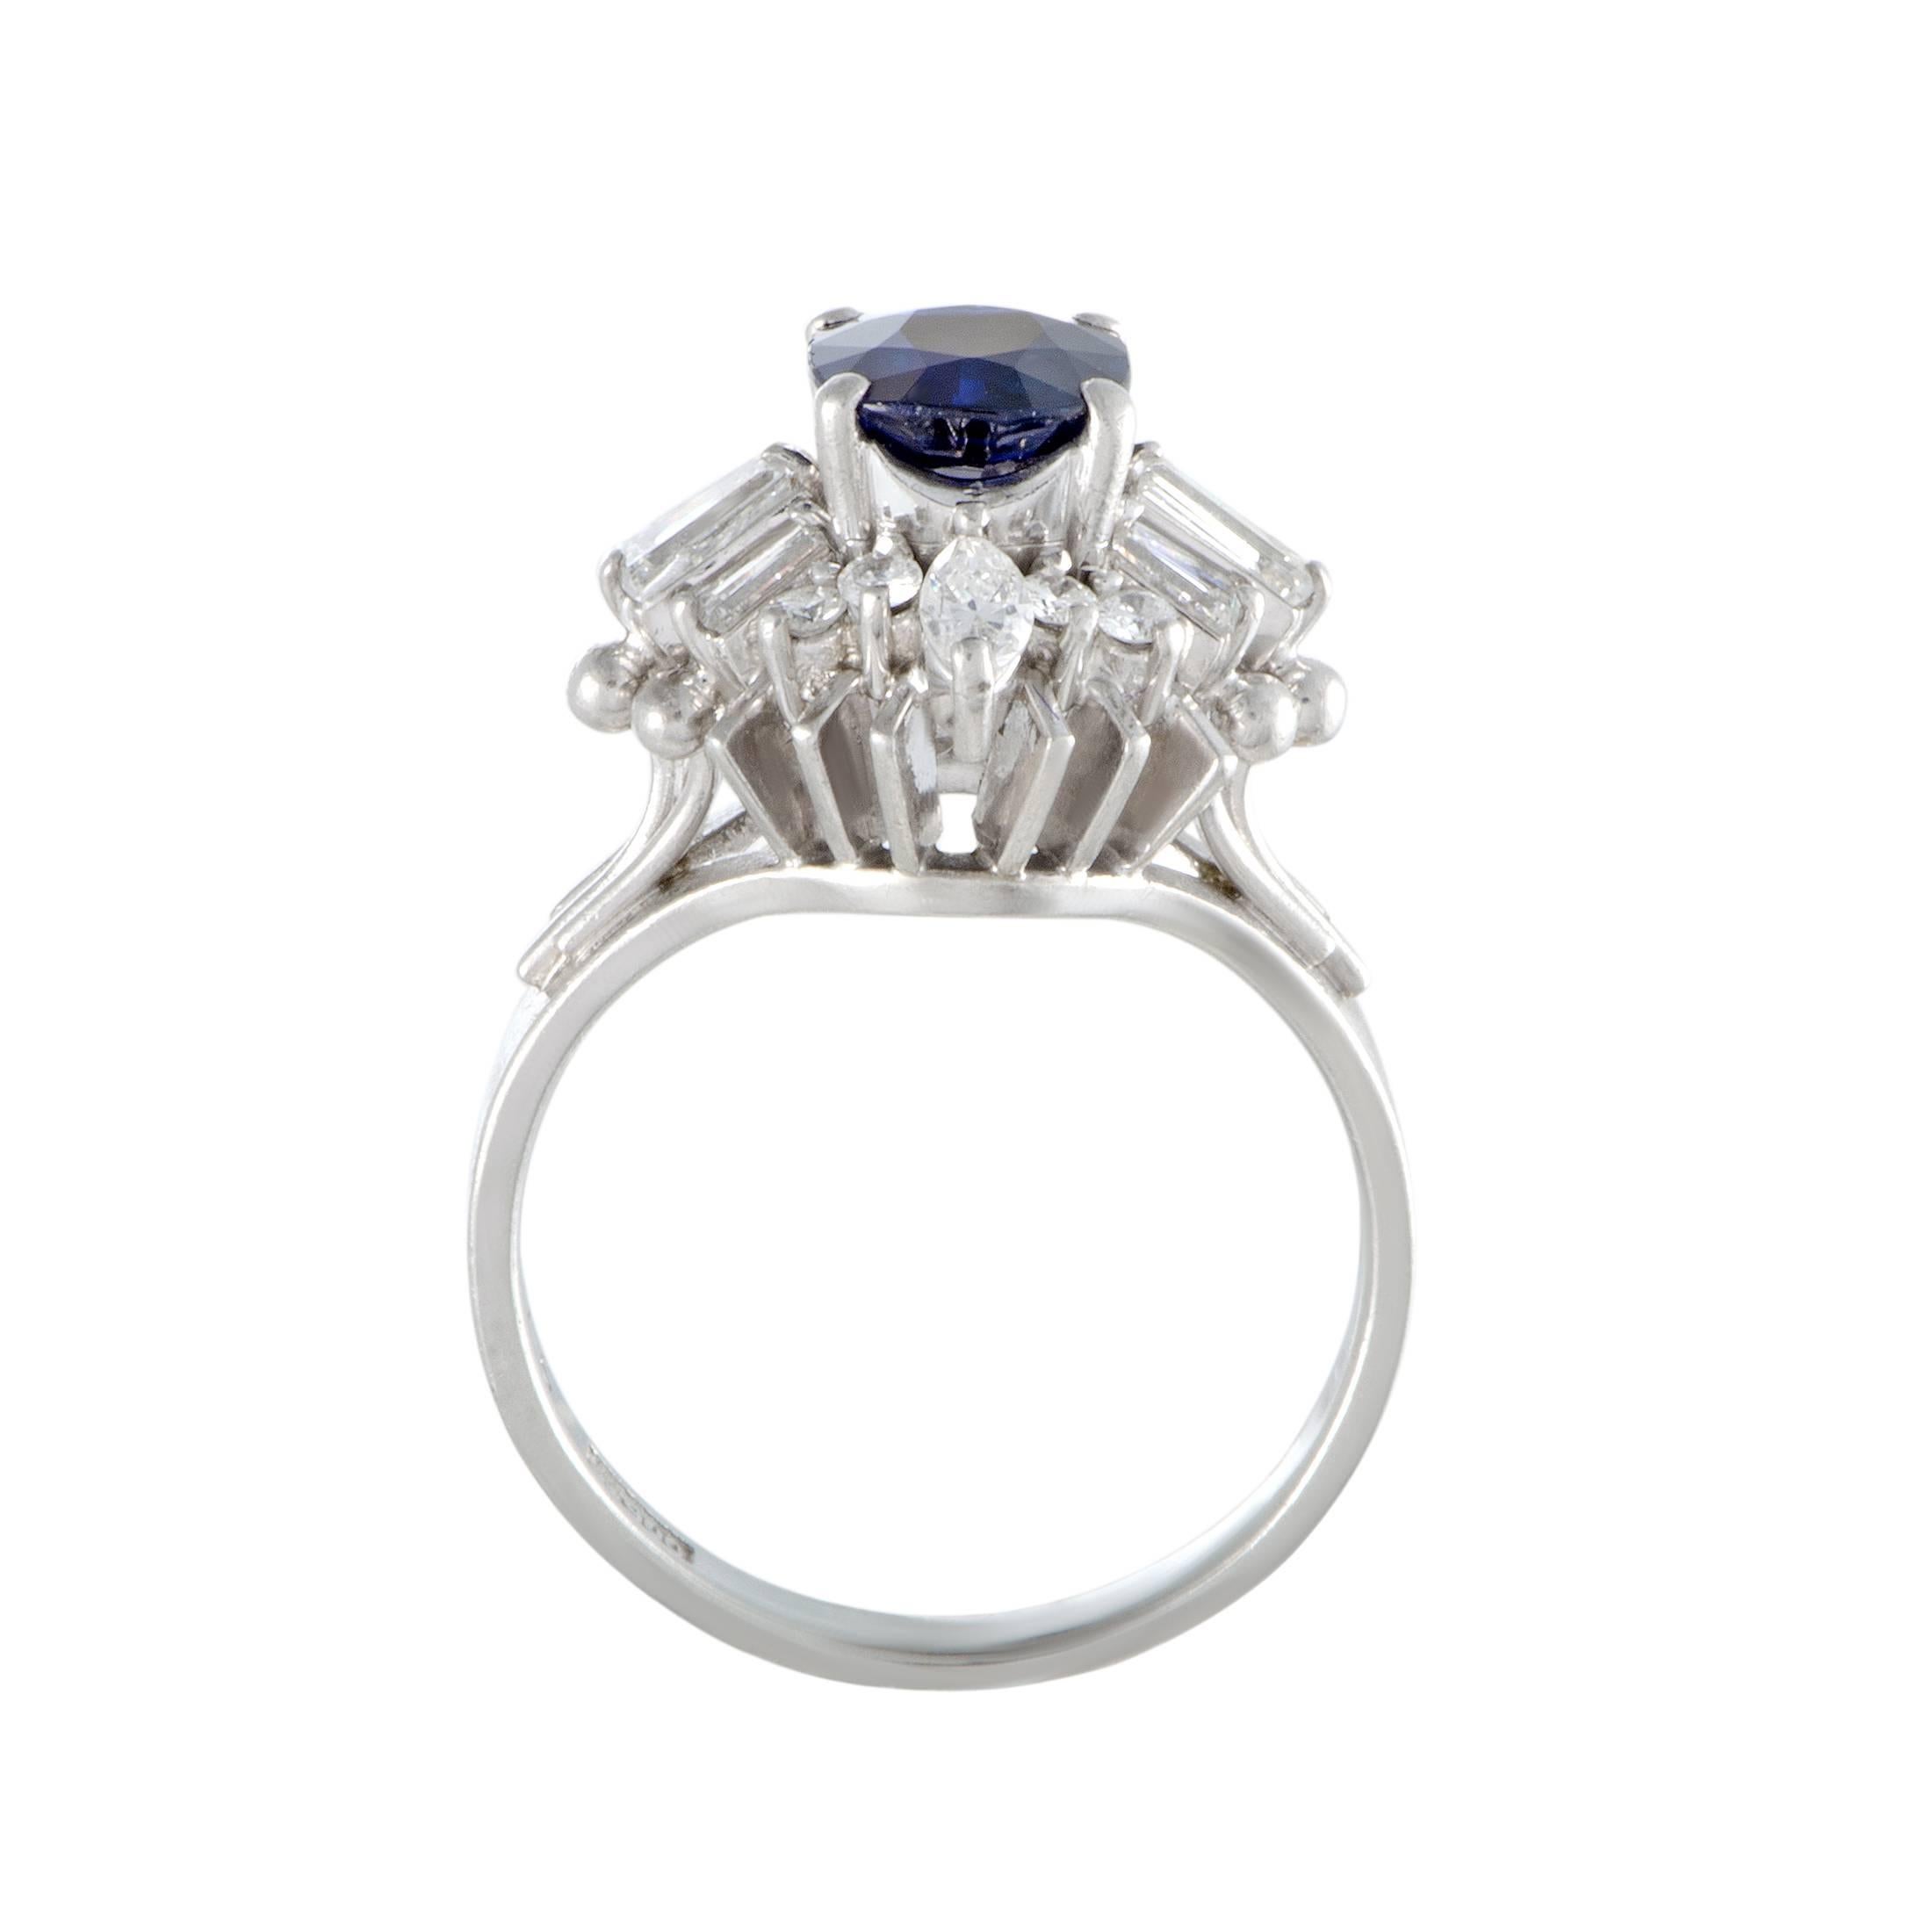 The ever-regal sapphire creates a compellingly prestigious sight with the lustrous diamonds in this sumptuous ring that is splendidly made of luxurious platinum. The sapphire weighs 1.06 carats and it is accentuated by a total of 0.61 carats of